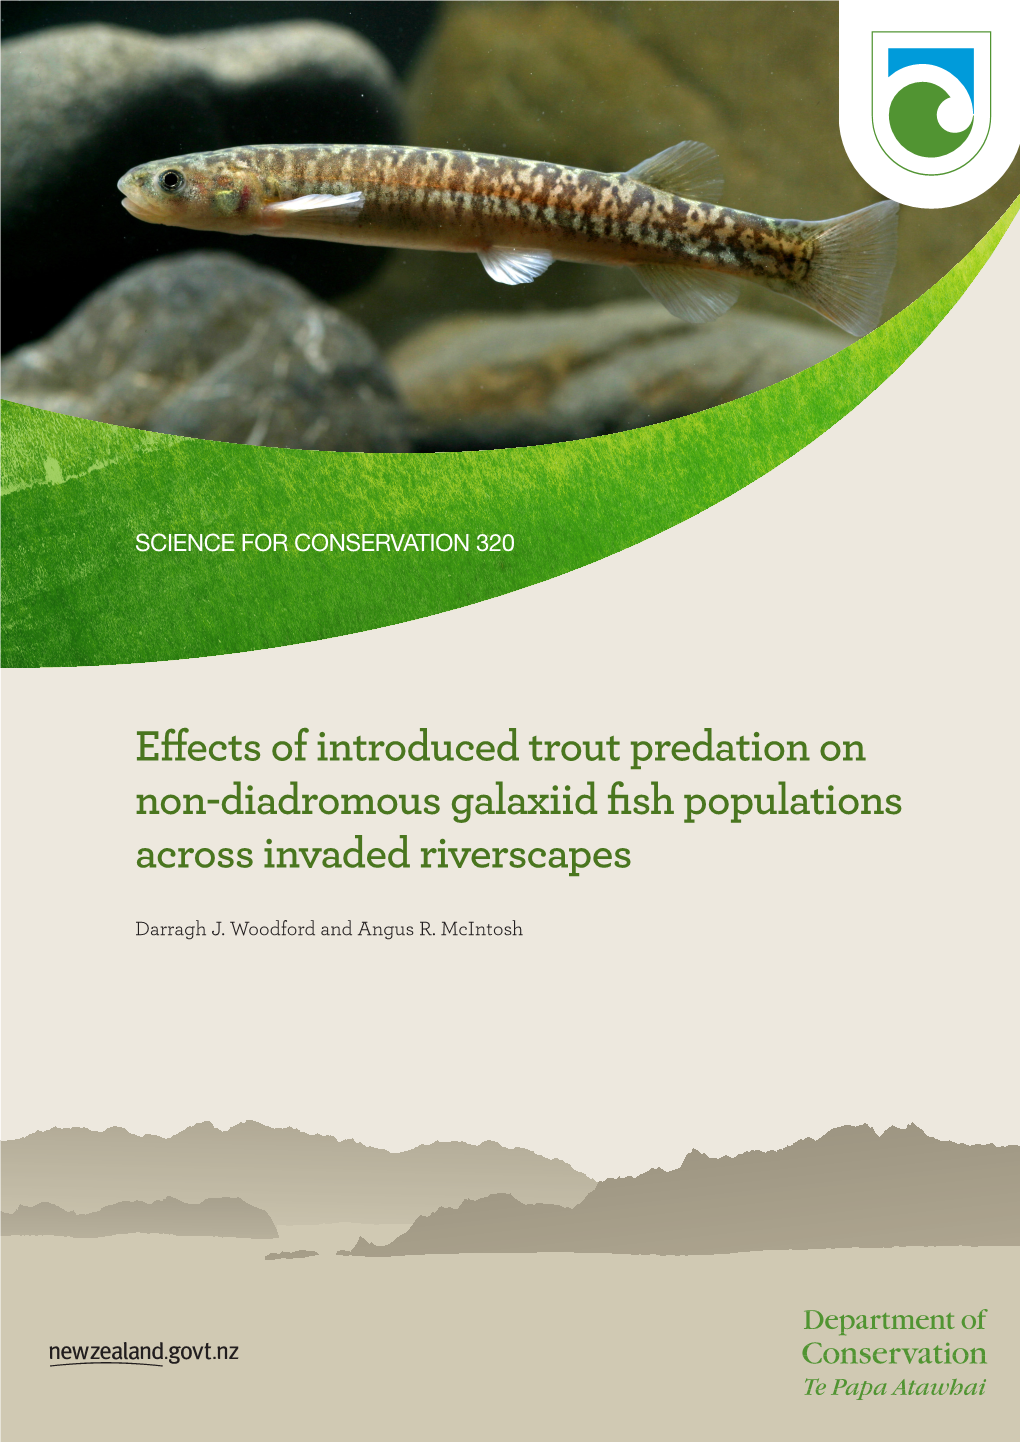 Effects of Introduced Trout Predation on Non-Diadromous Galaxiid Fish Populations Across Invaded Riverscapes